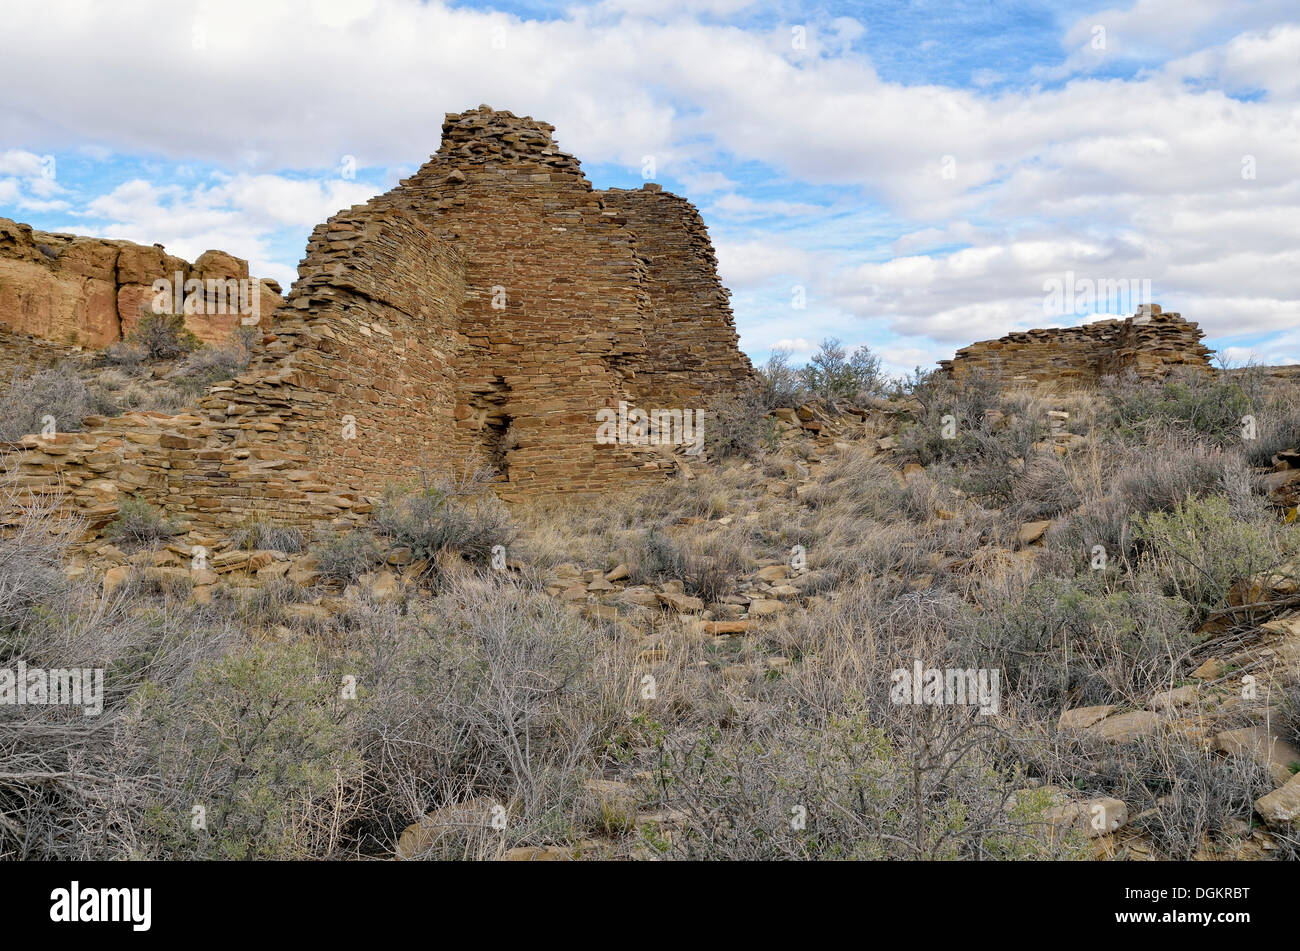 Wall ruins of the historic Anasazi settlement, Hugo Pavi Great House, 1000 - 1250 AD, Chaco Culture National Historical Park Stock Photo